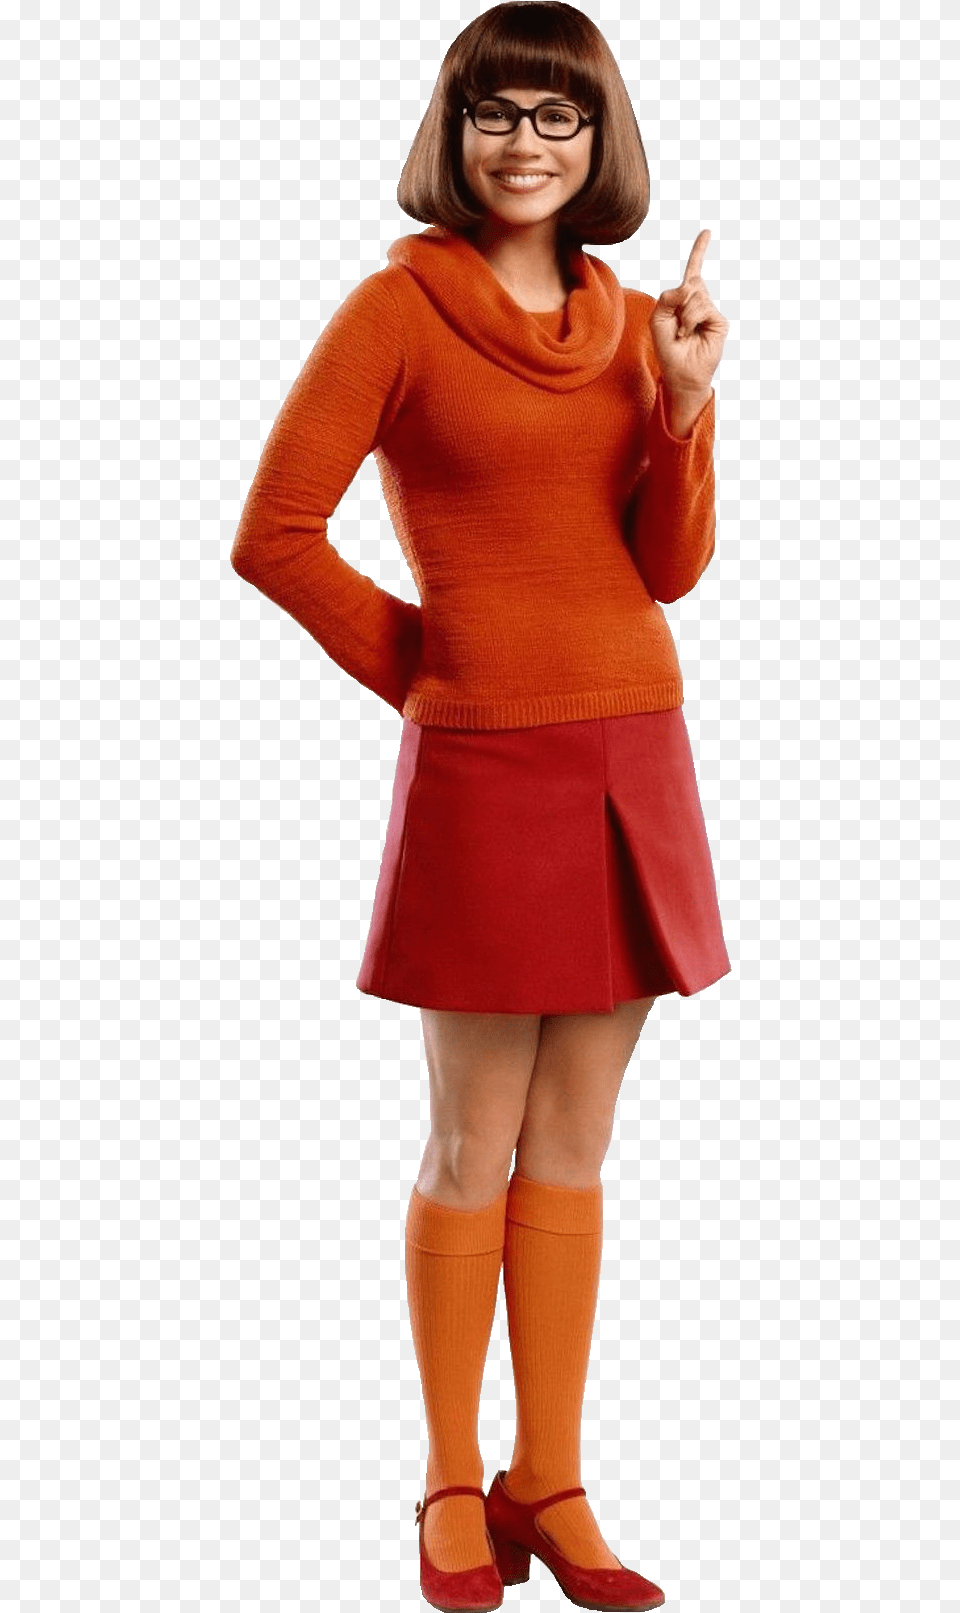 Velma Download Velma Scooby Doo Movie Outfit, Clothing, Skirt, Woman, Person Png Image